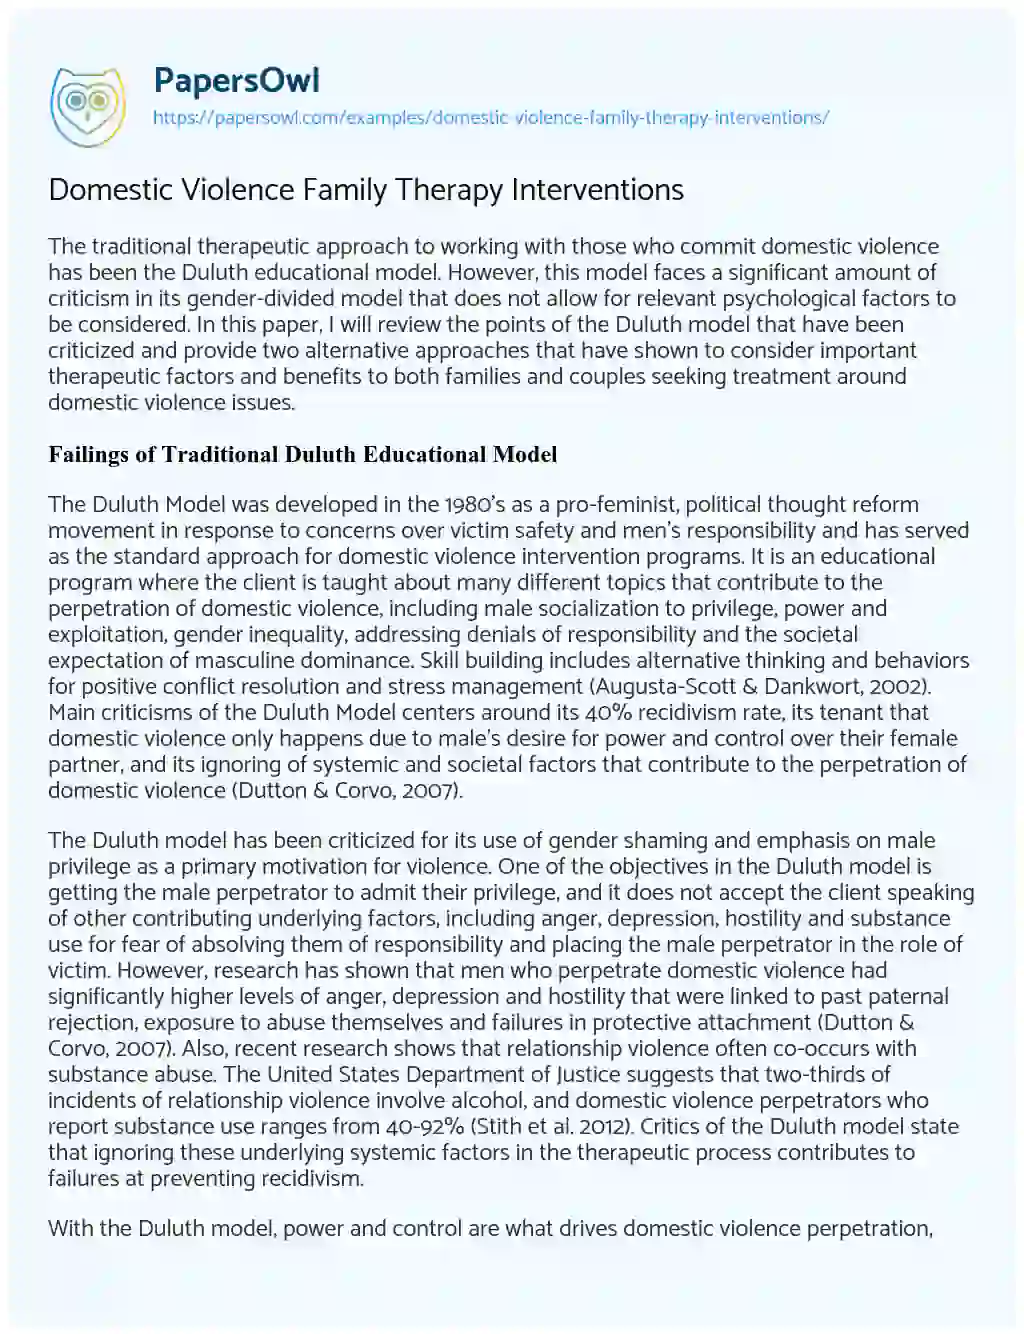 Essay on Domestic Violence Family Therapy Interventions